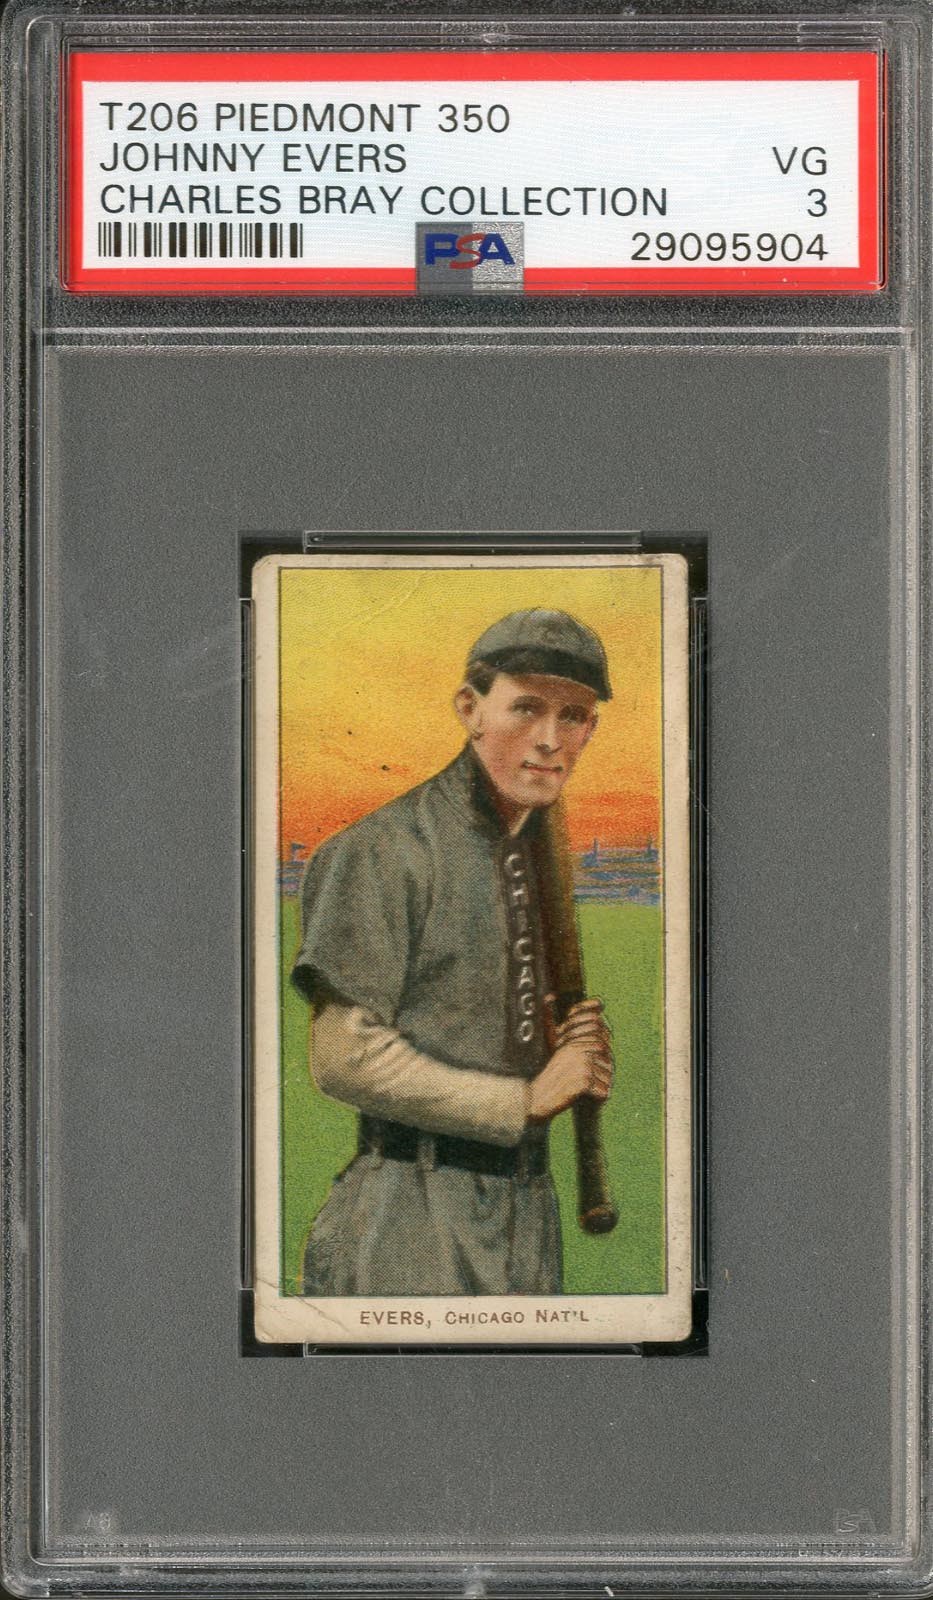 - T206 Piedmont 350 Johnny Evers PSA 3 From The Charles Bray Collection